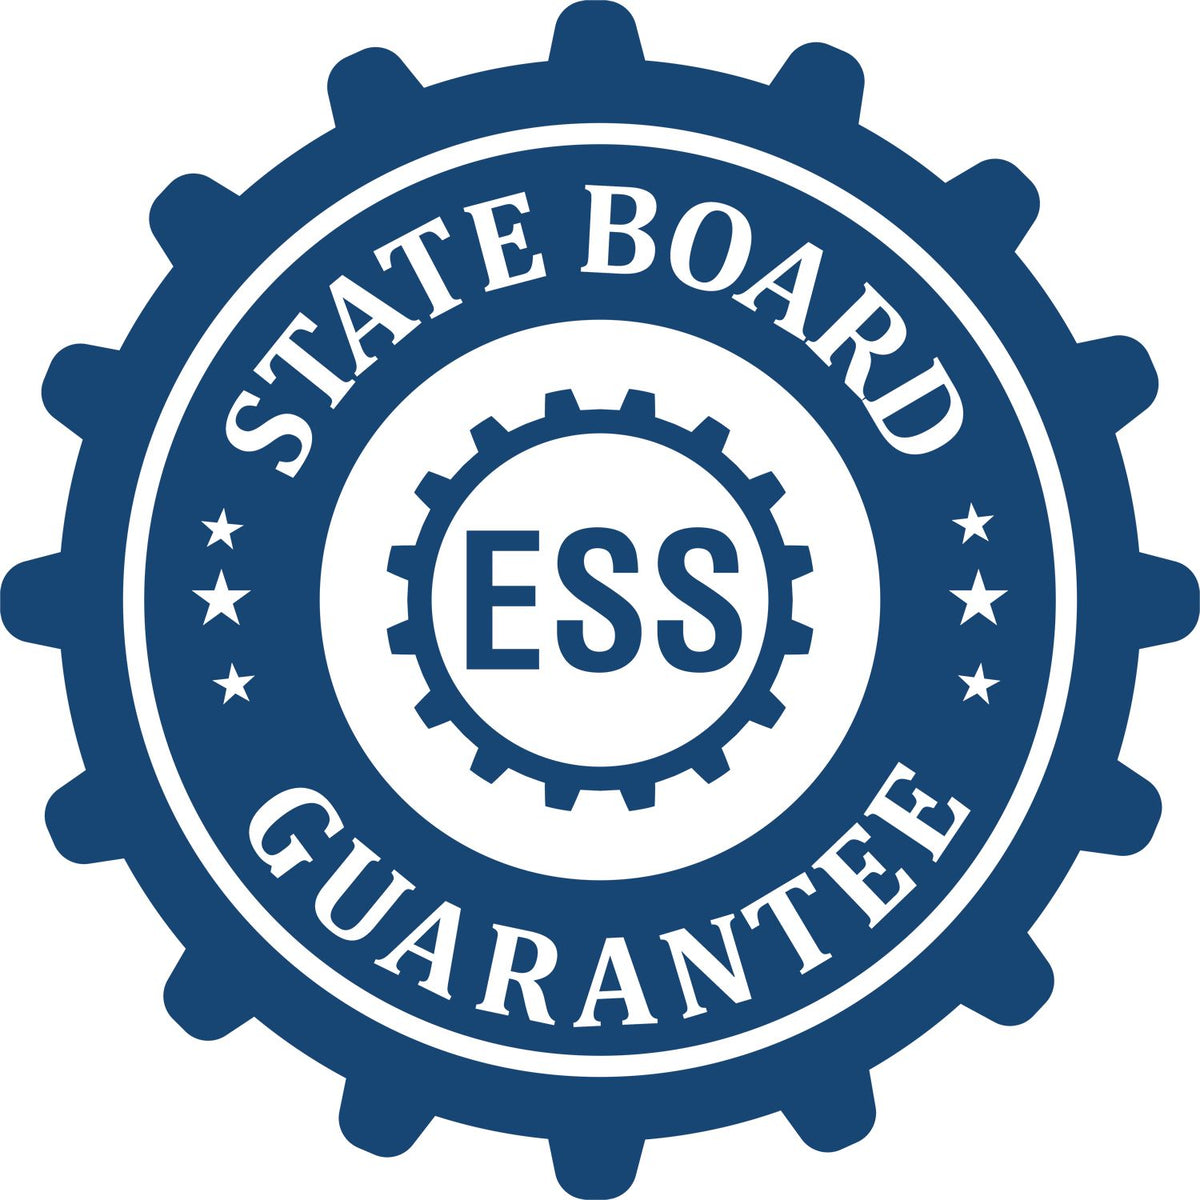 An emblem in a gear shape illustrating a state board guarantee for the State of Montana Extended Long Reach Engineer Seal product.